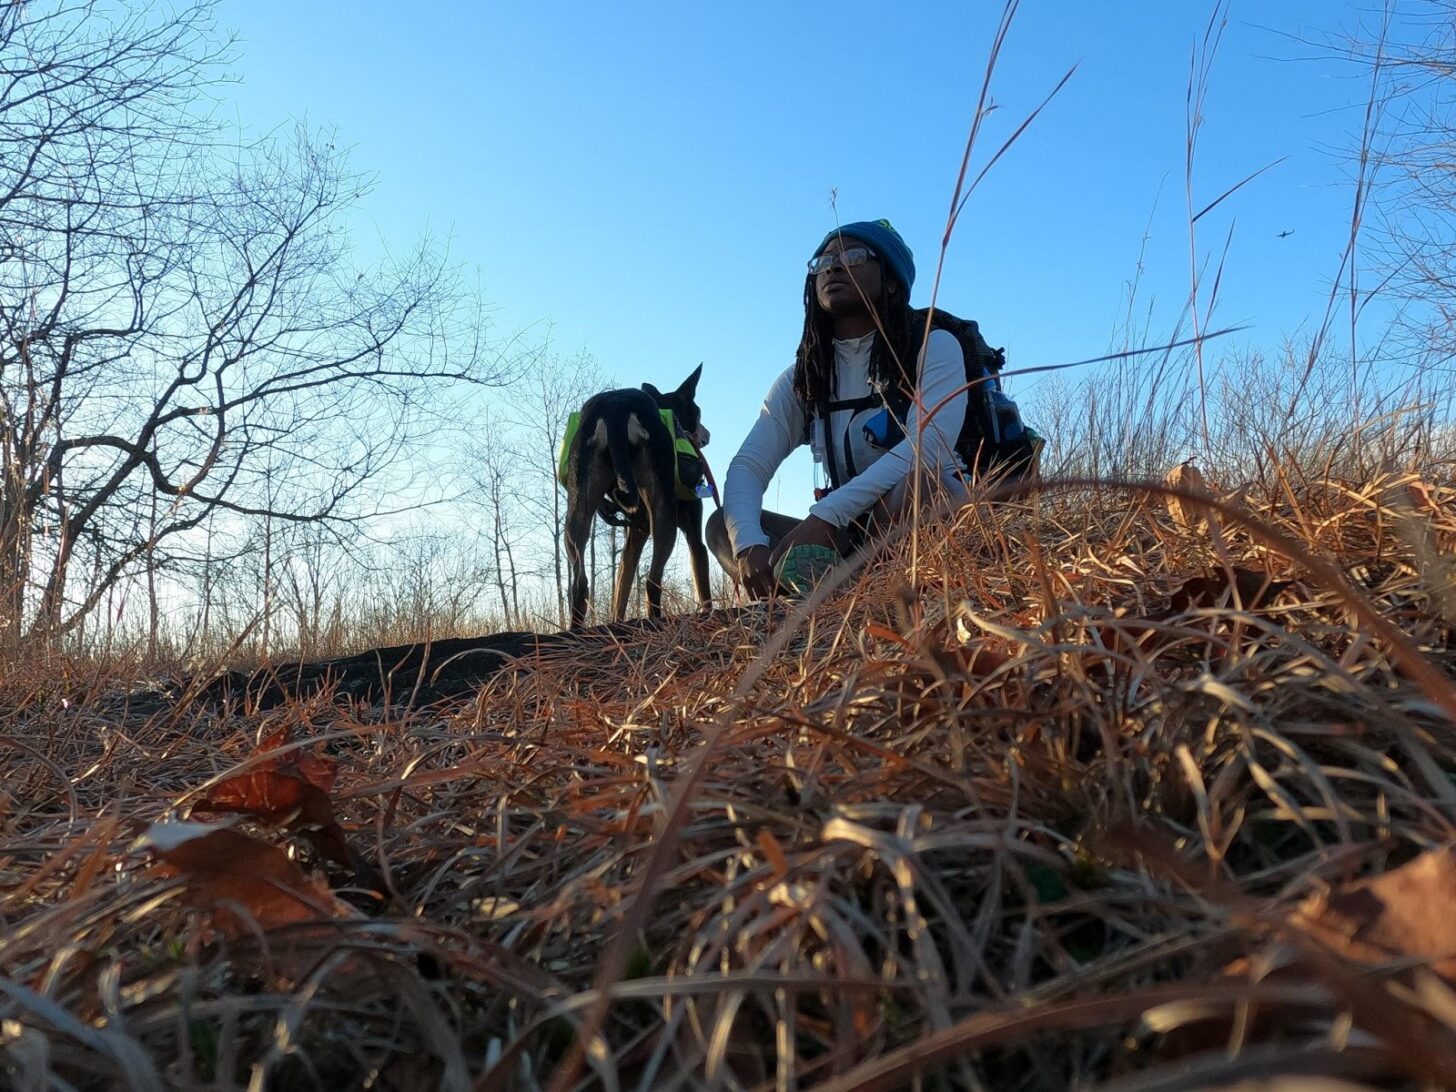 A Black woman and her dog resting in a field.